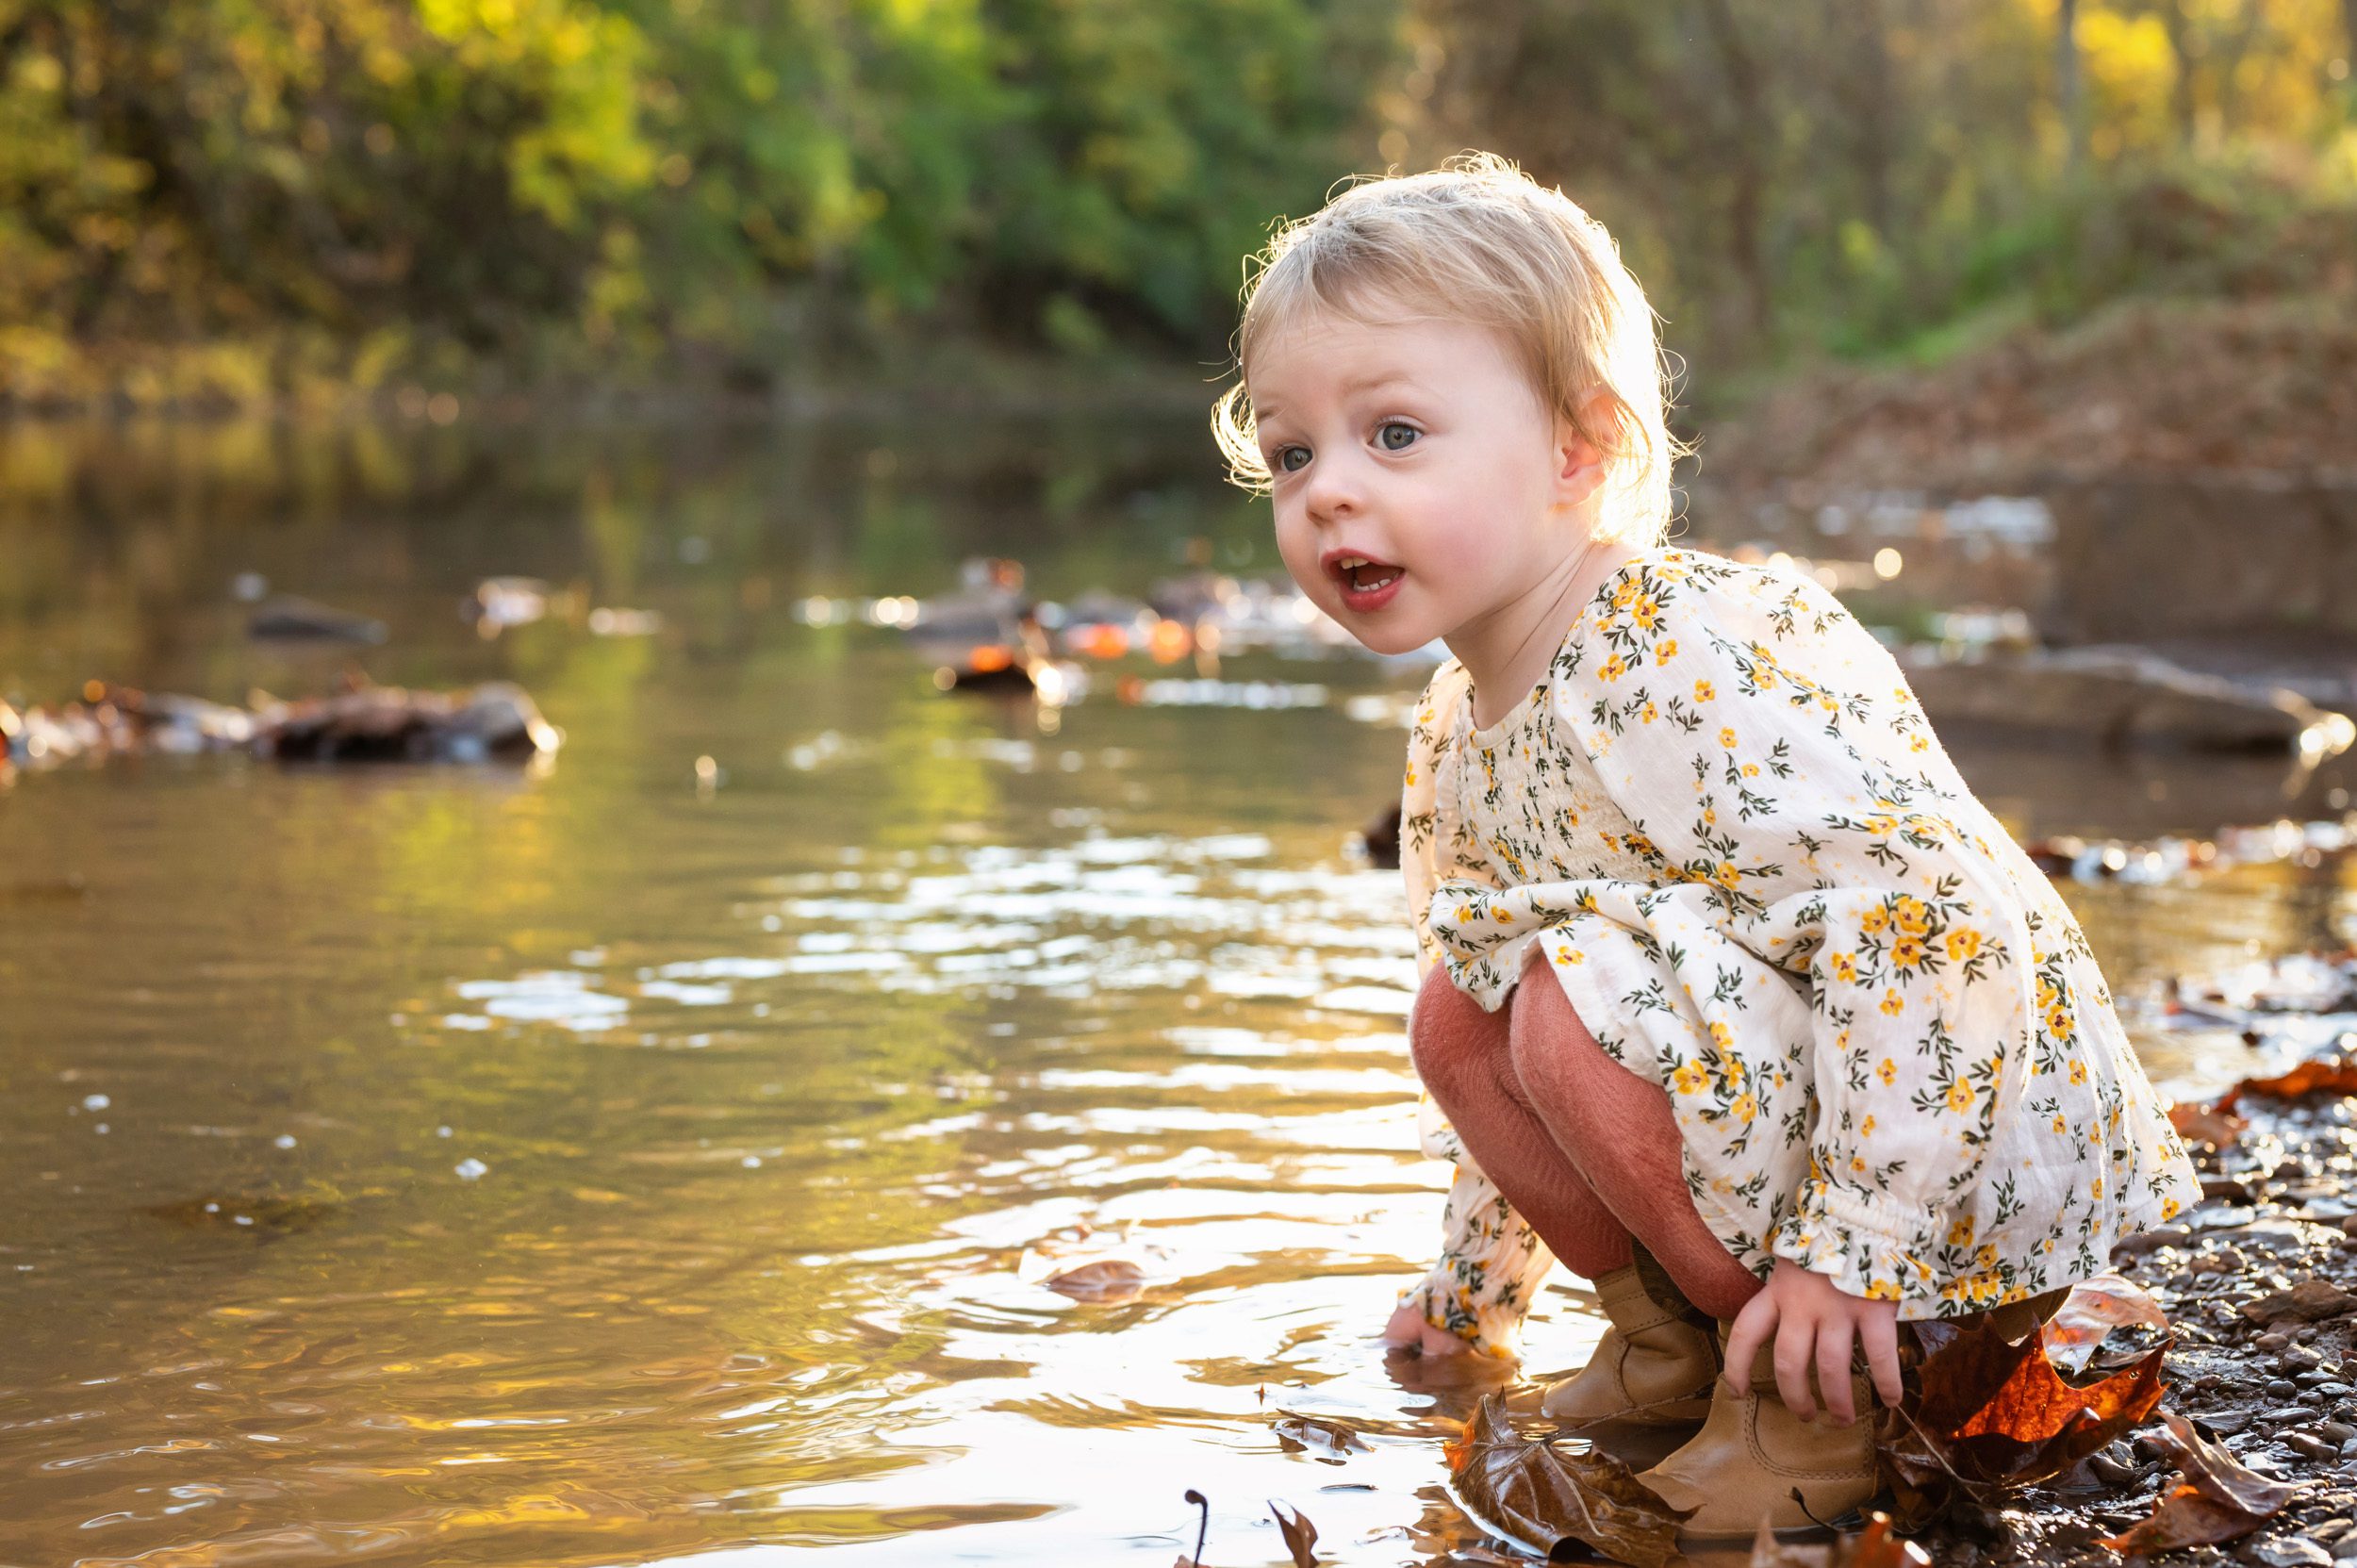 Close up picture of a young girl dipping her fingers into a creek and looking across the creek with wonder during a family photo session